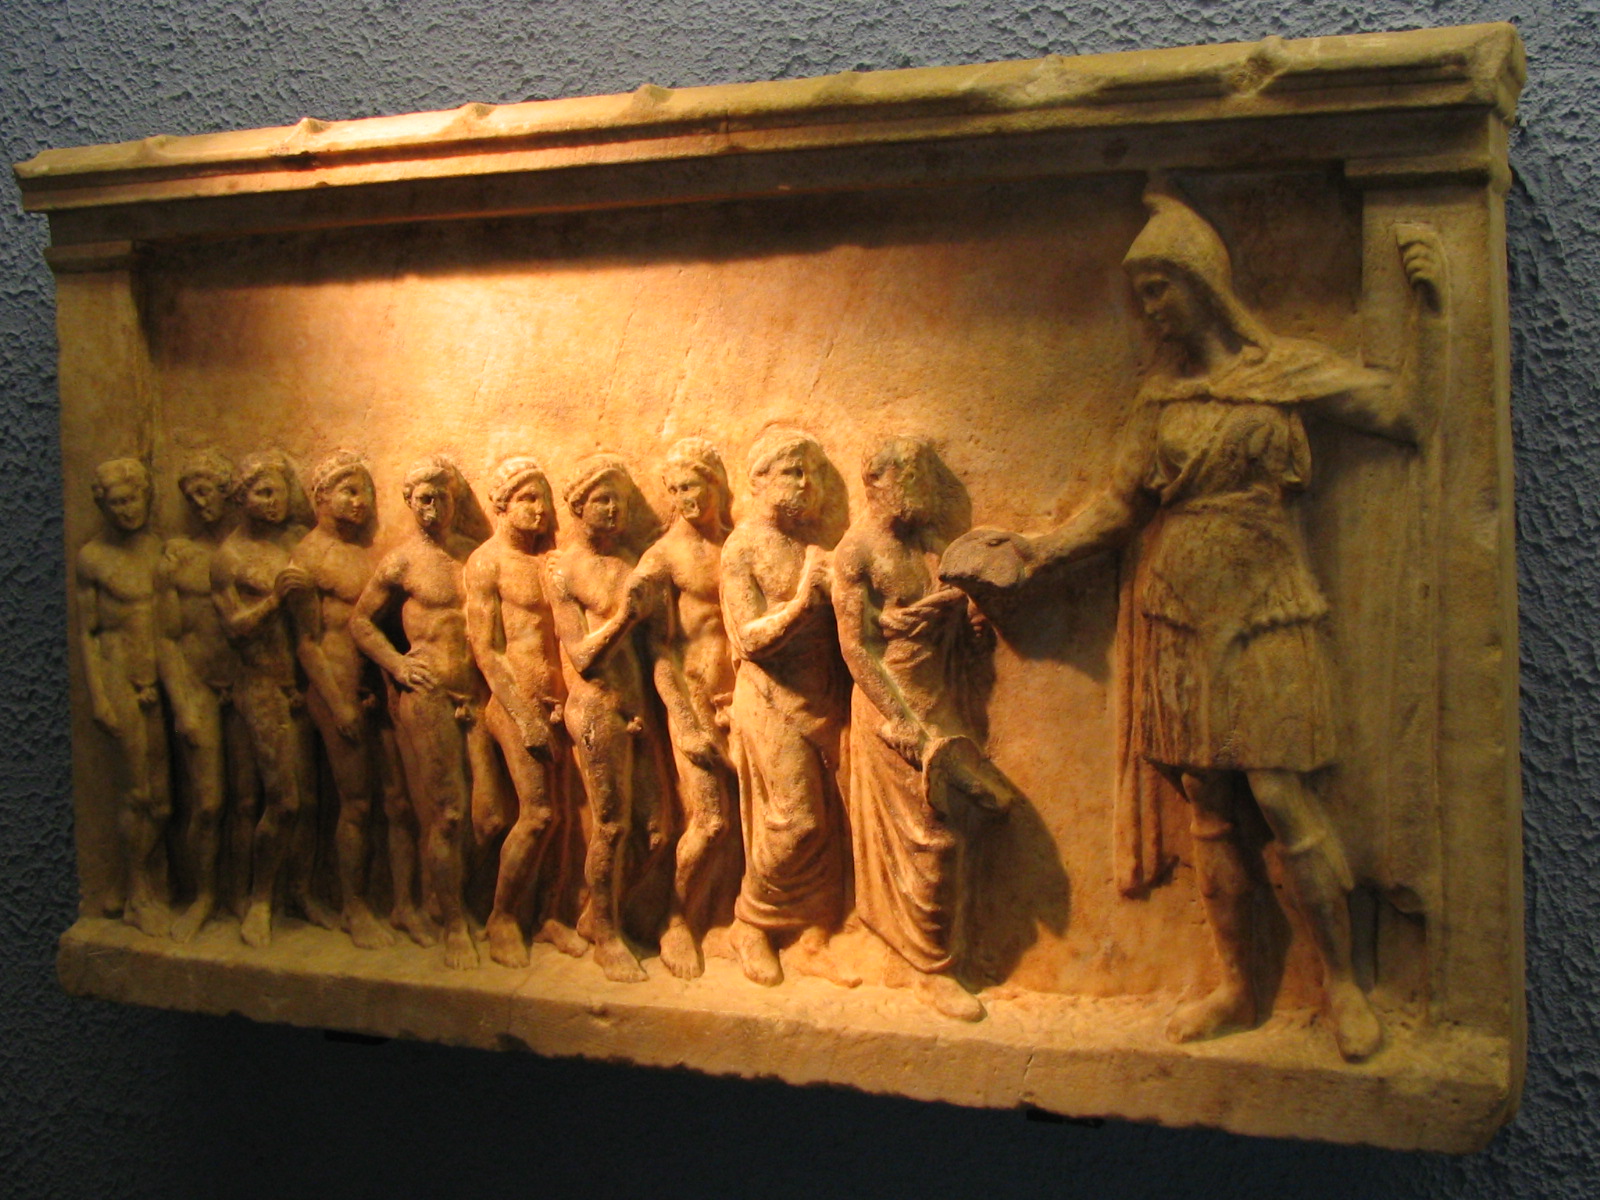 The goddess Bendis and worshippers (from Piraeus)